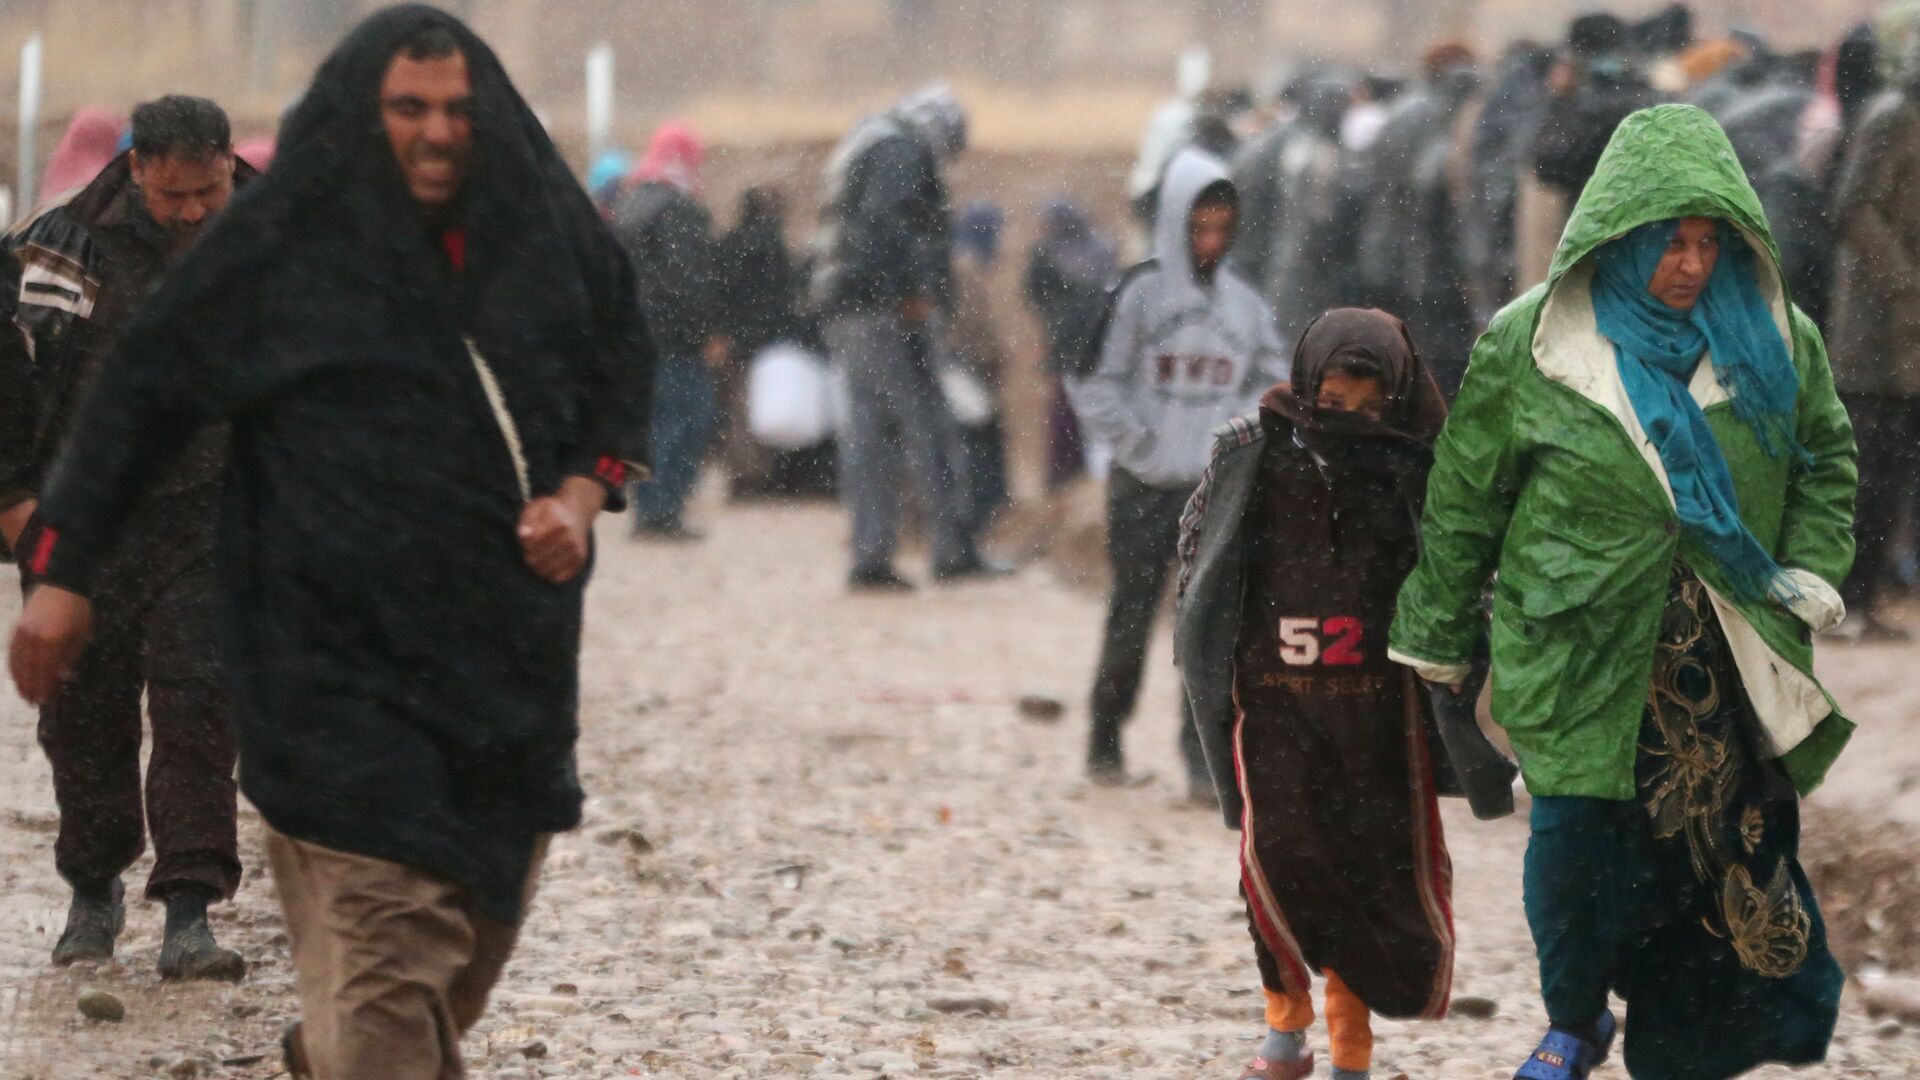 Displaced Iraqis, who fled the Islamic State stronghold of Mosul, walk under rain in Khazer camp, Iraq December 14, 2016 - Sputnik International, 1920, 21.03.2022